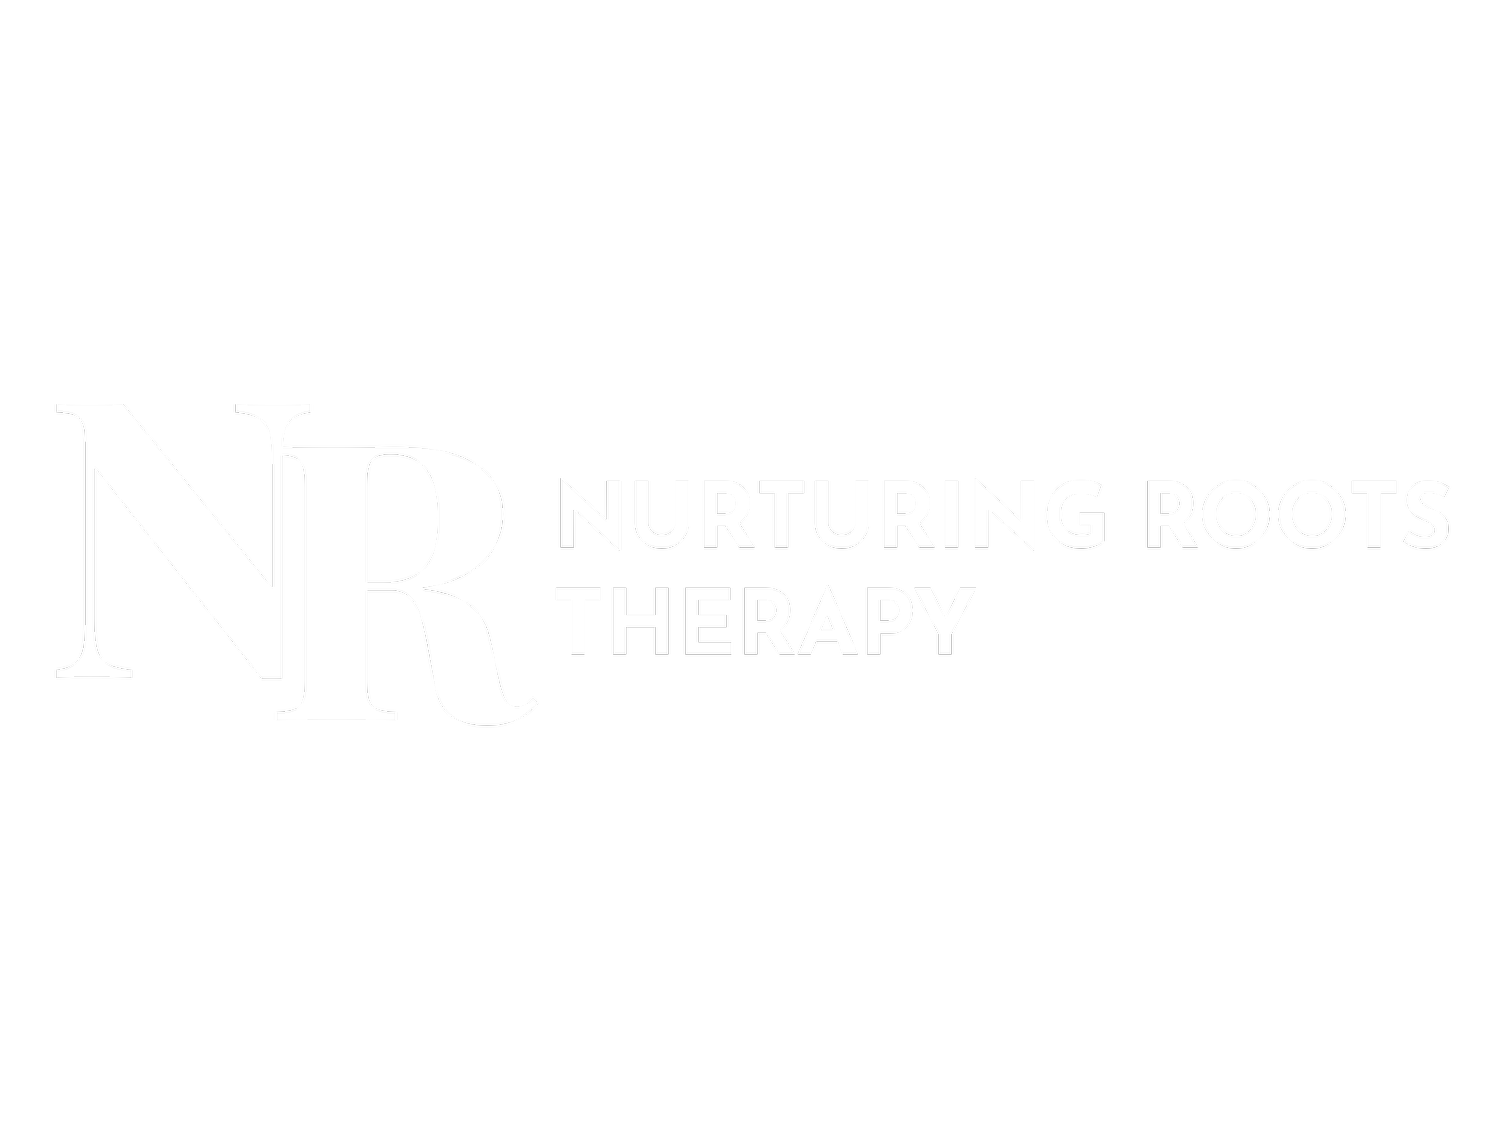 Nurturing Roots Therapy